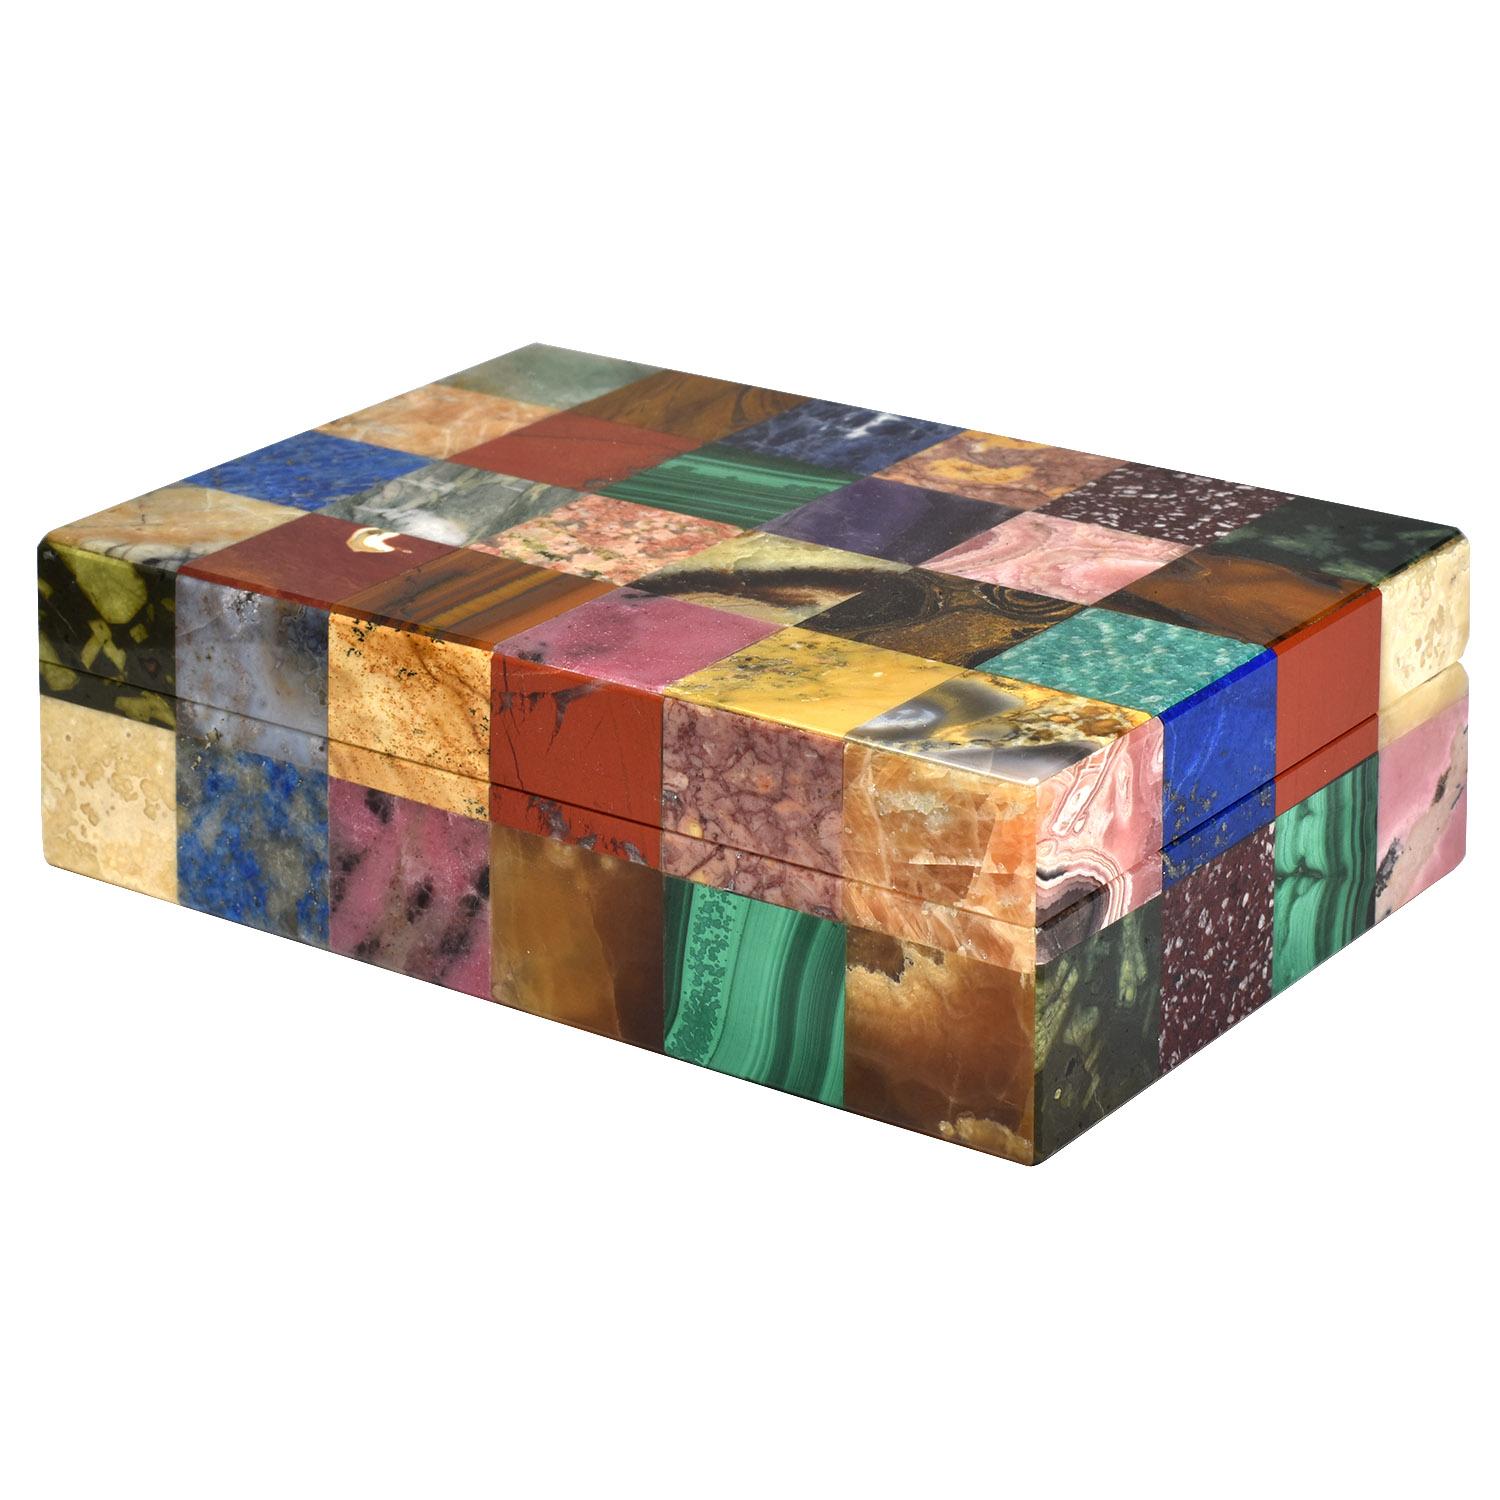 20th Century Italian Multi-Stone Mosaic Mineral Specimen Box with Onyx Interior

This exquisitely made natural mineral specimen box features sixty four .75-inch sliced stone squares that are beautifully aligned, resulting in an elegant objet d’art.